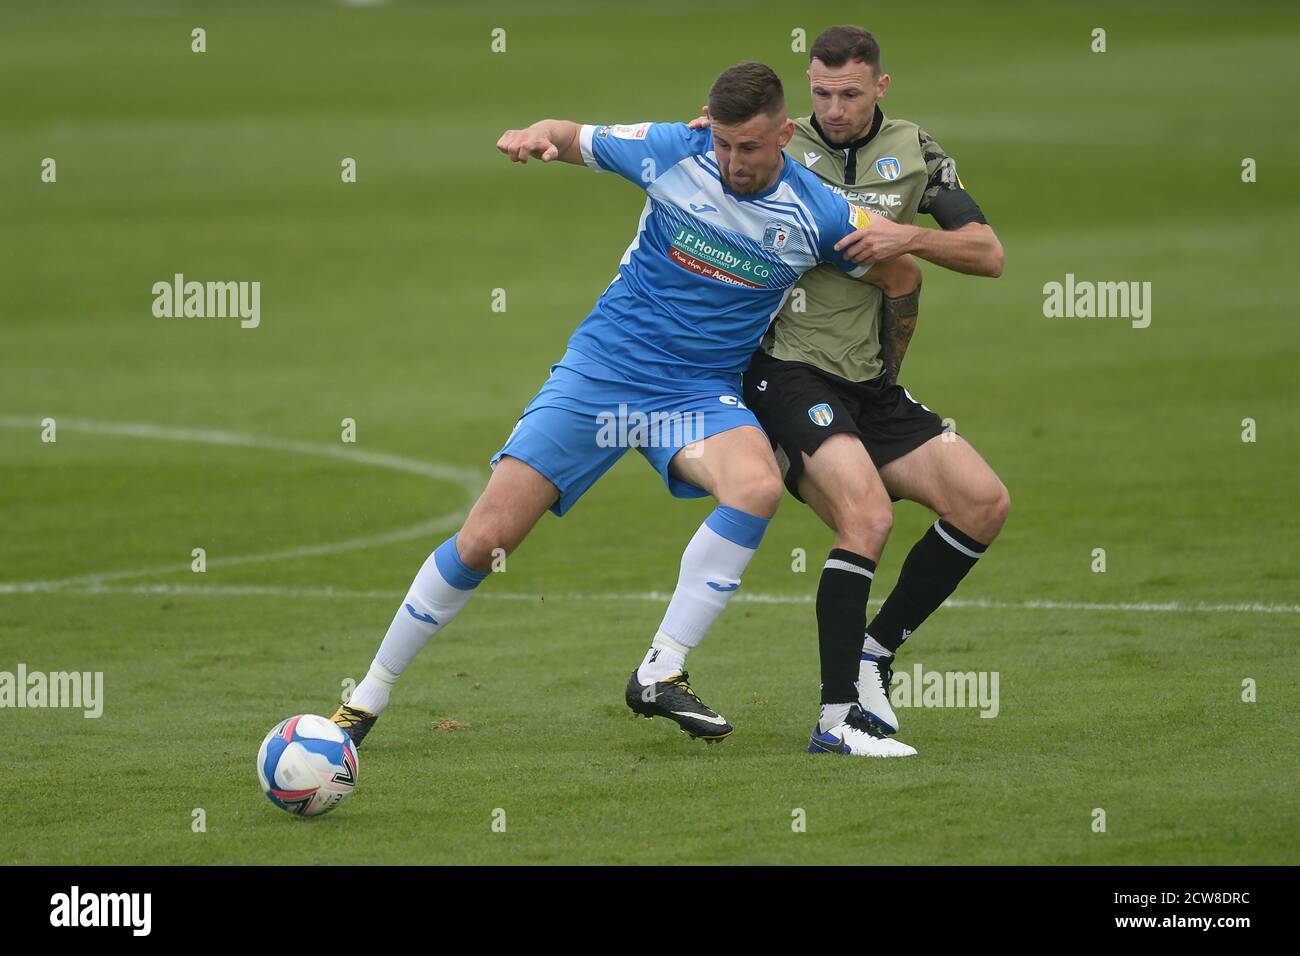 Scott Quigley of Barrow does battle with Tommy Smith of Colchester United - Barrow v Colchester United, Sky Bet League Two, The Progression Solicitors Stadium, Barrow-in-Furness, UK - 26th September 2020  Editorial Use Only - DataCo restrictions apply Stock Photo